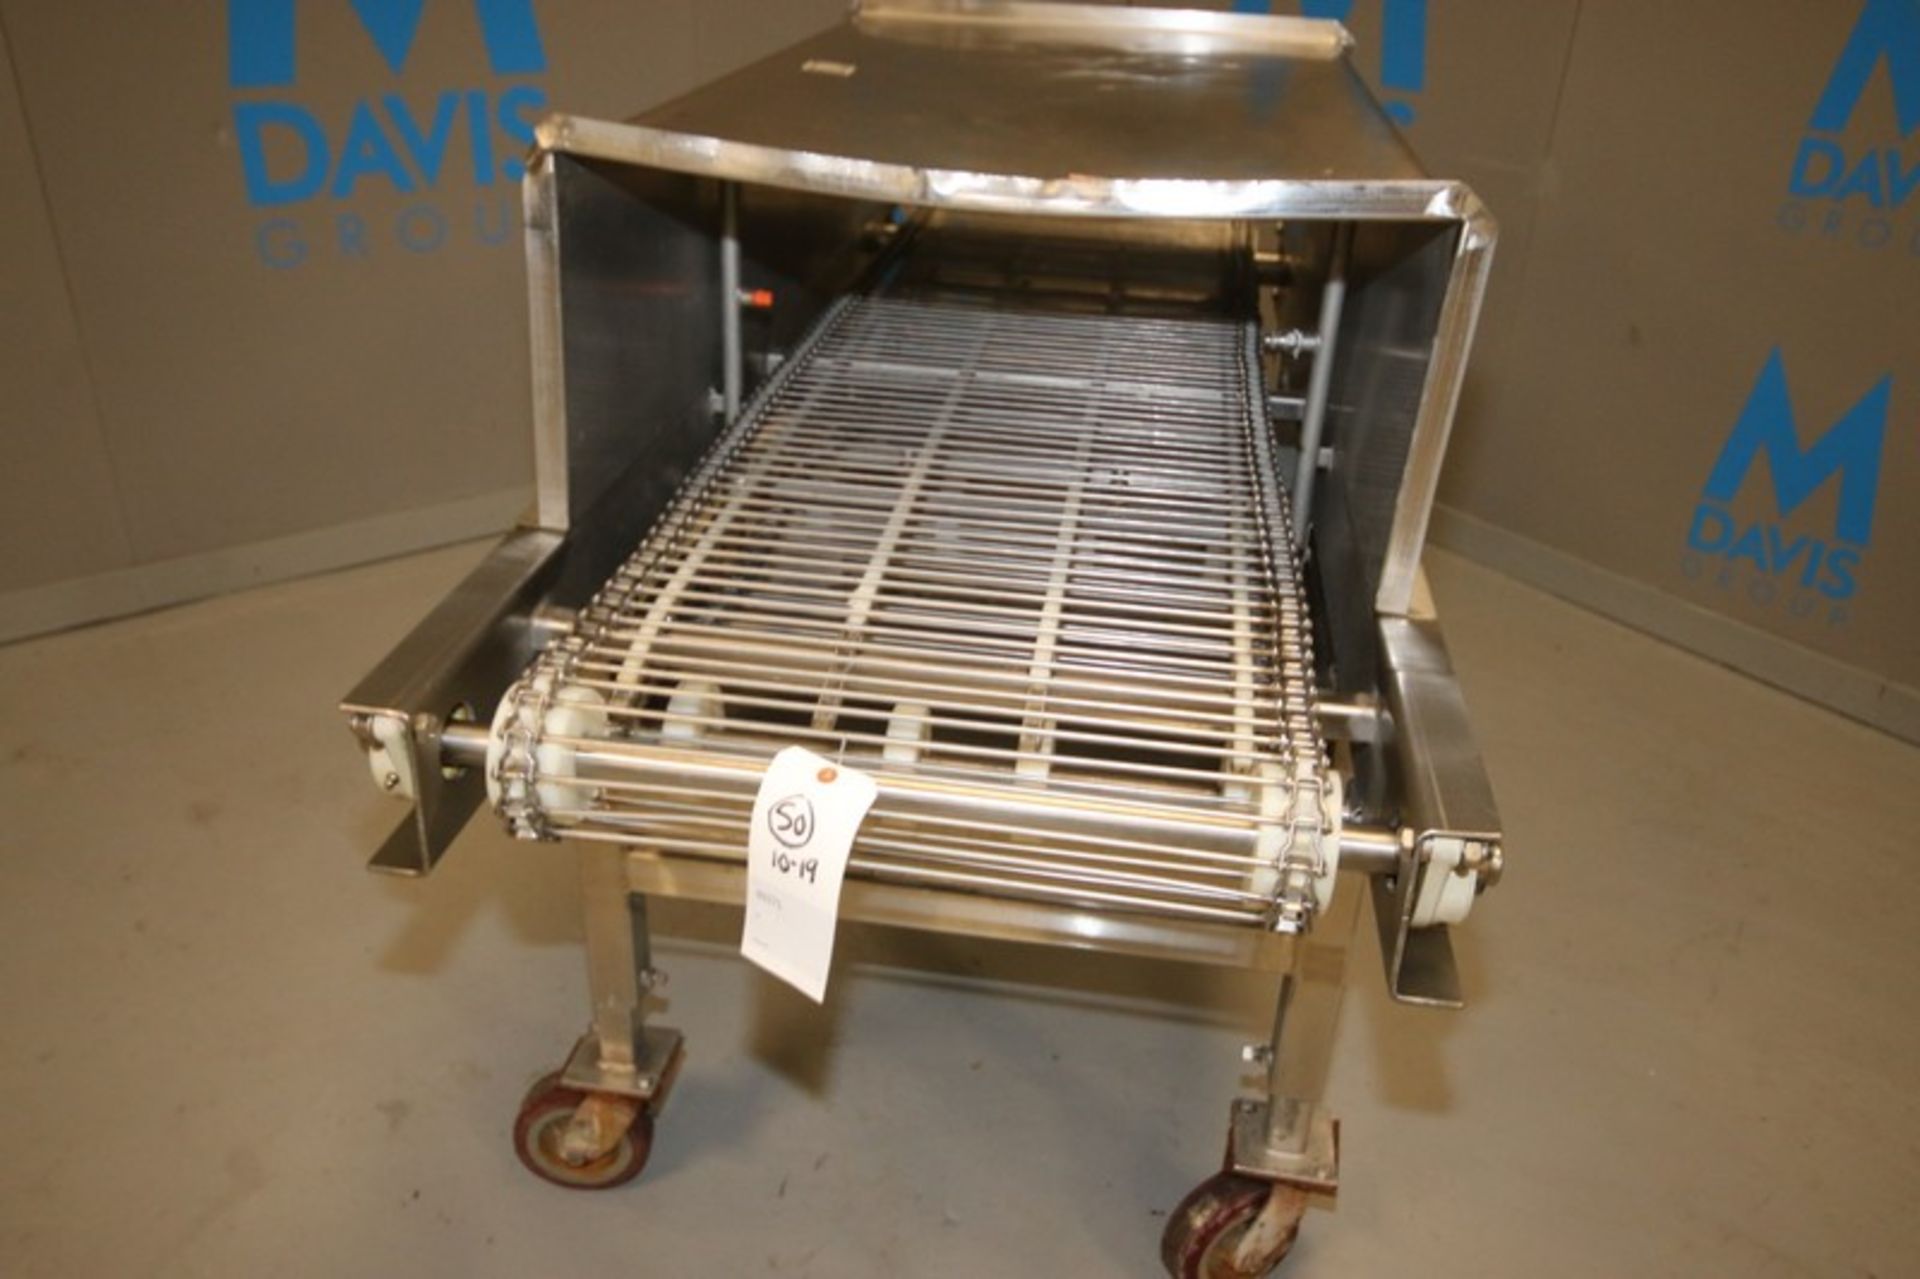 E-Quip Enclosed S/S Conveyor, M/N 238, Factory No.: 8636-S-6, with Baldor 3/4 hp Drive, with - Image 4 of 10